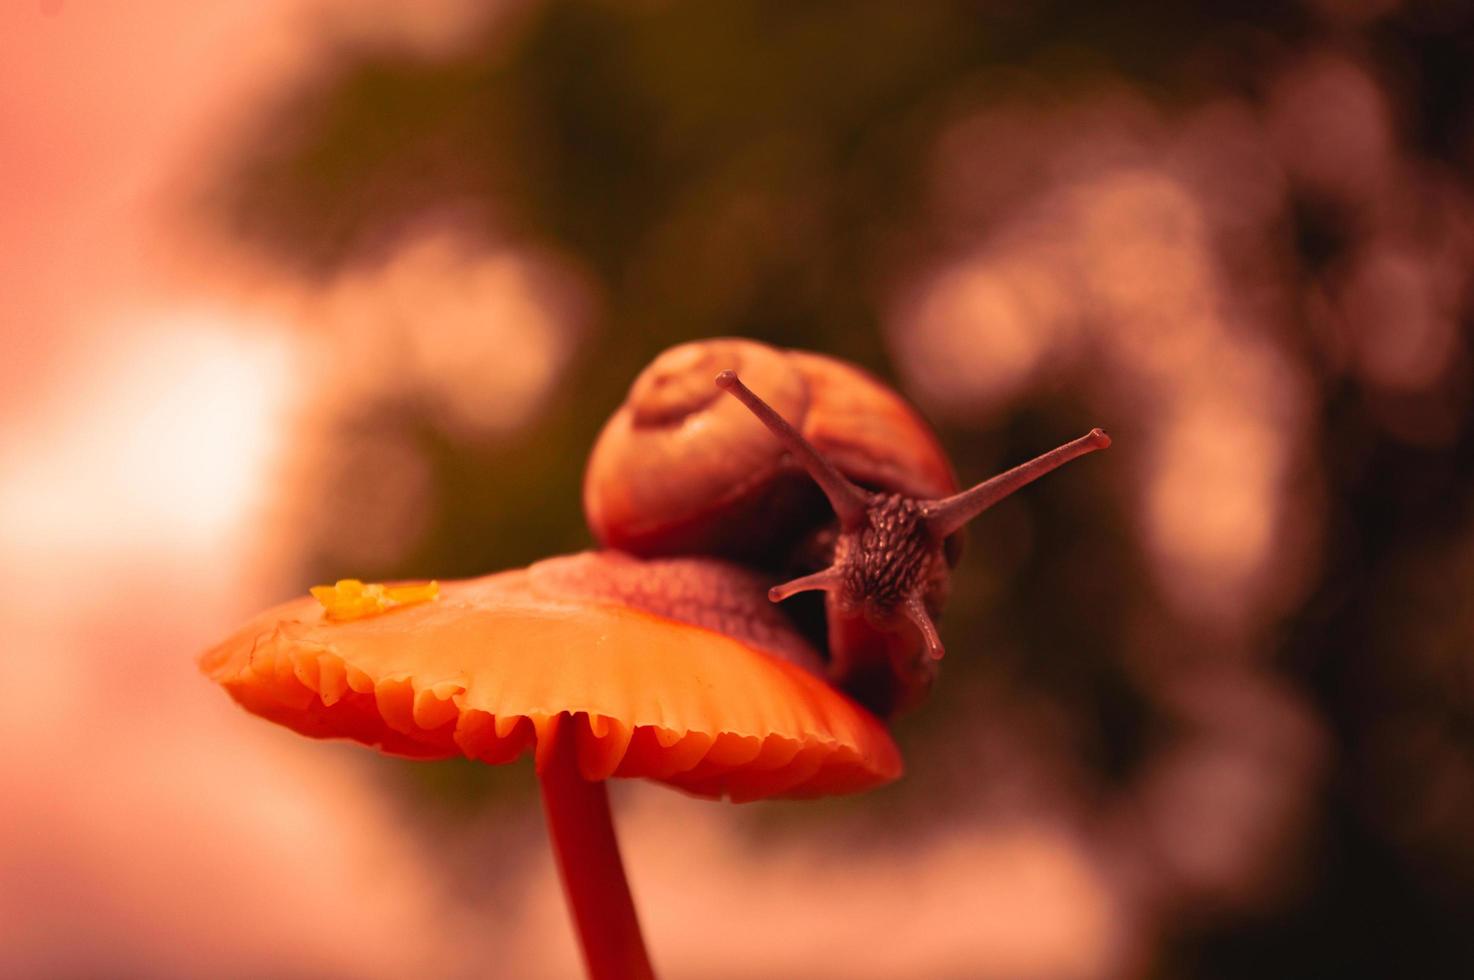 Burgundy snail at sunset in dark red colors and in a natural environment photo